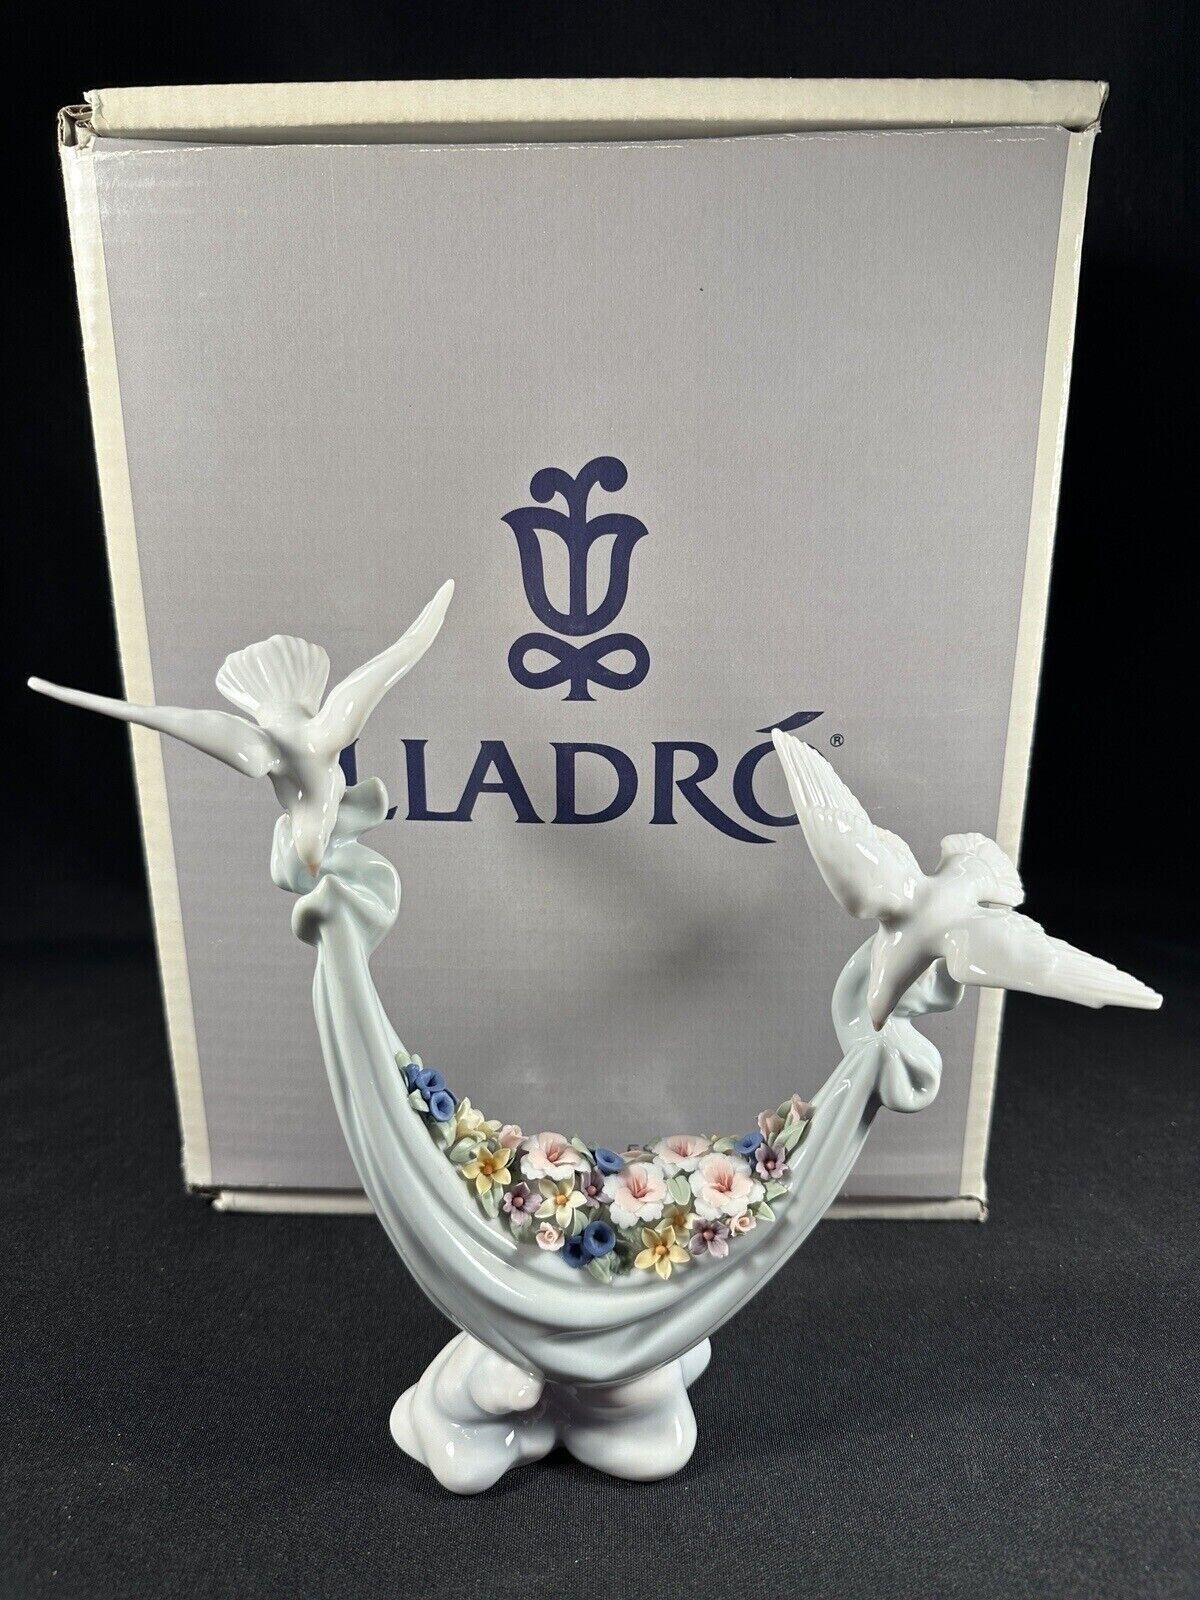 BOX LLADRO 6579 PETALS OF PEACE FLOWERS DOVES FIGURINE MADE IN SPAIN - RETIRED